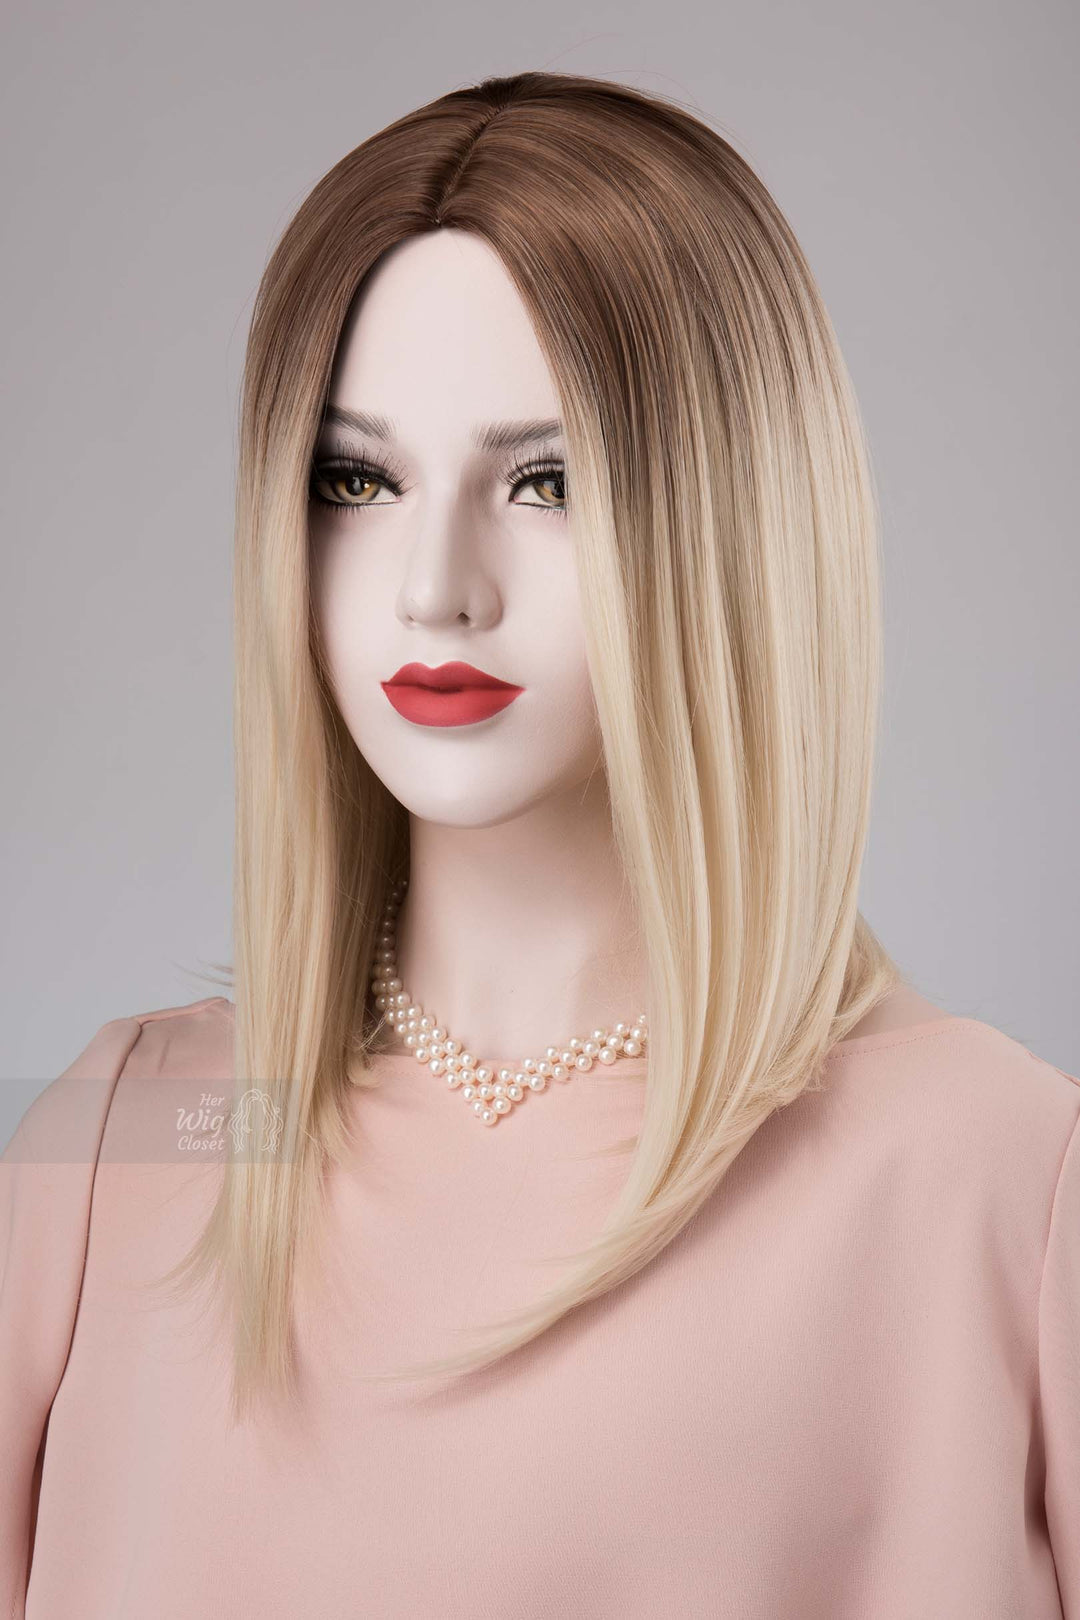 Ice Blonde Ombre Wig with Dark Roots Adina